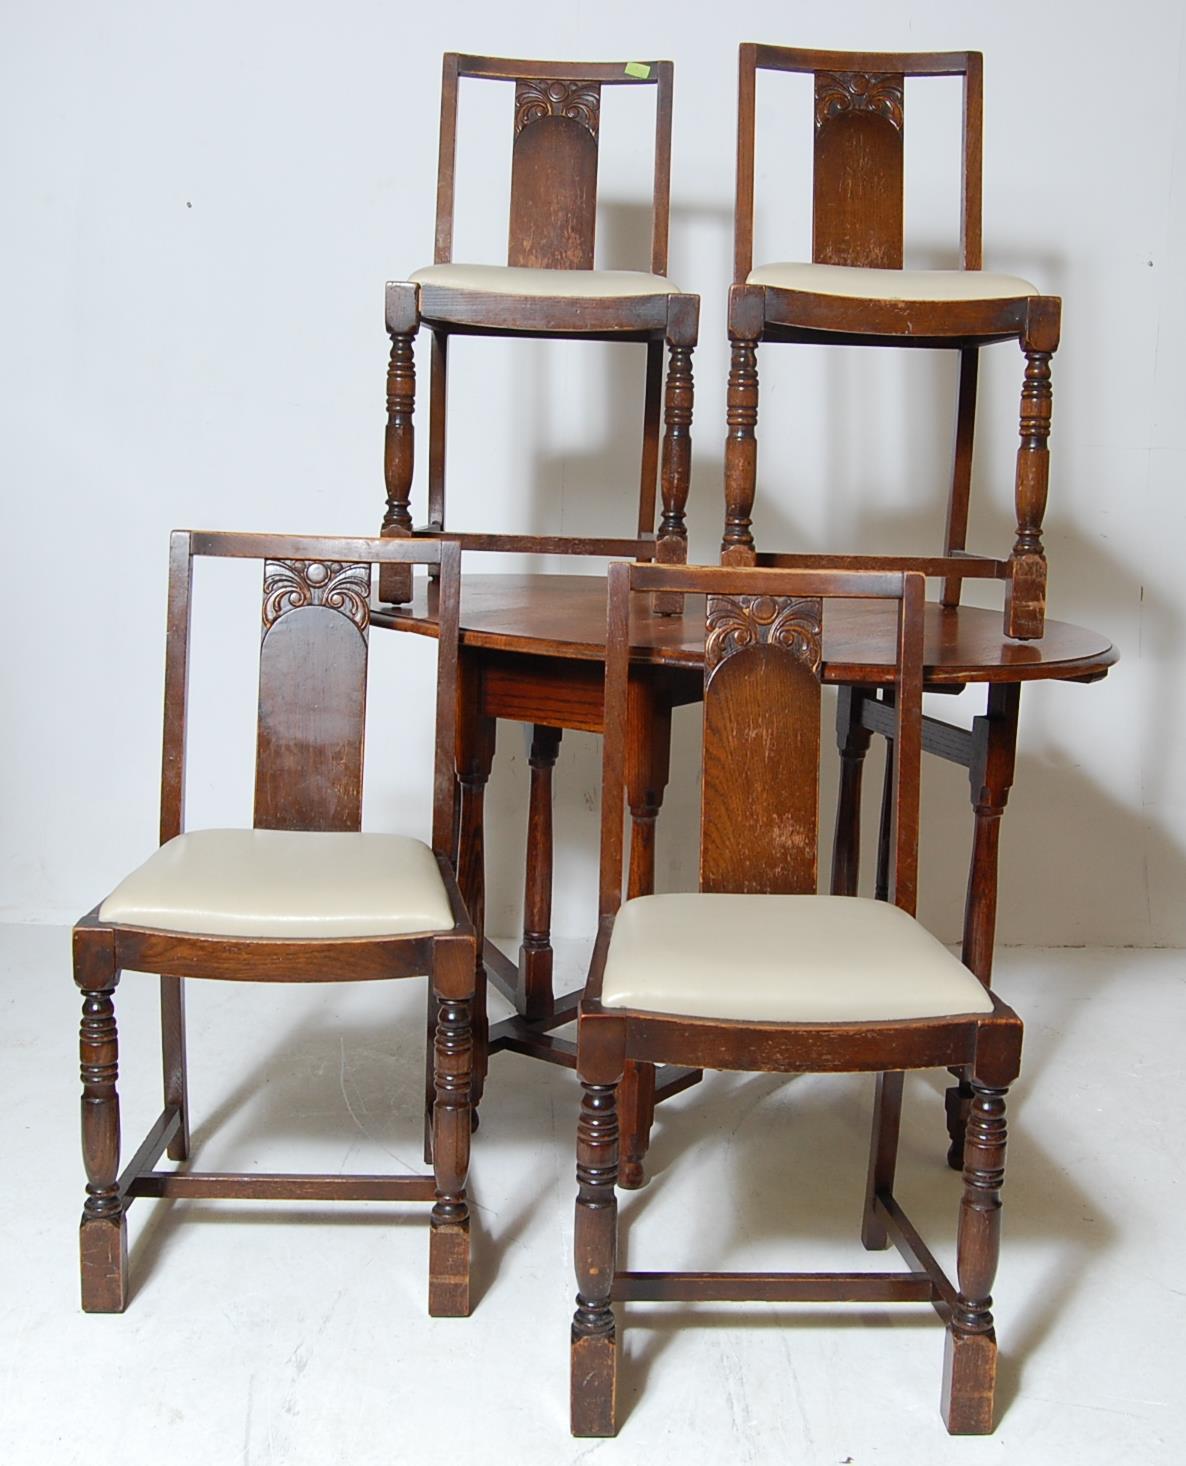 VINTAGE MID CENTURY ERCOL DINING CHAIRS TOGETHER WITH A DROP LEAF TABEL